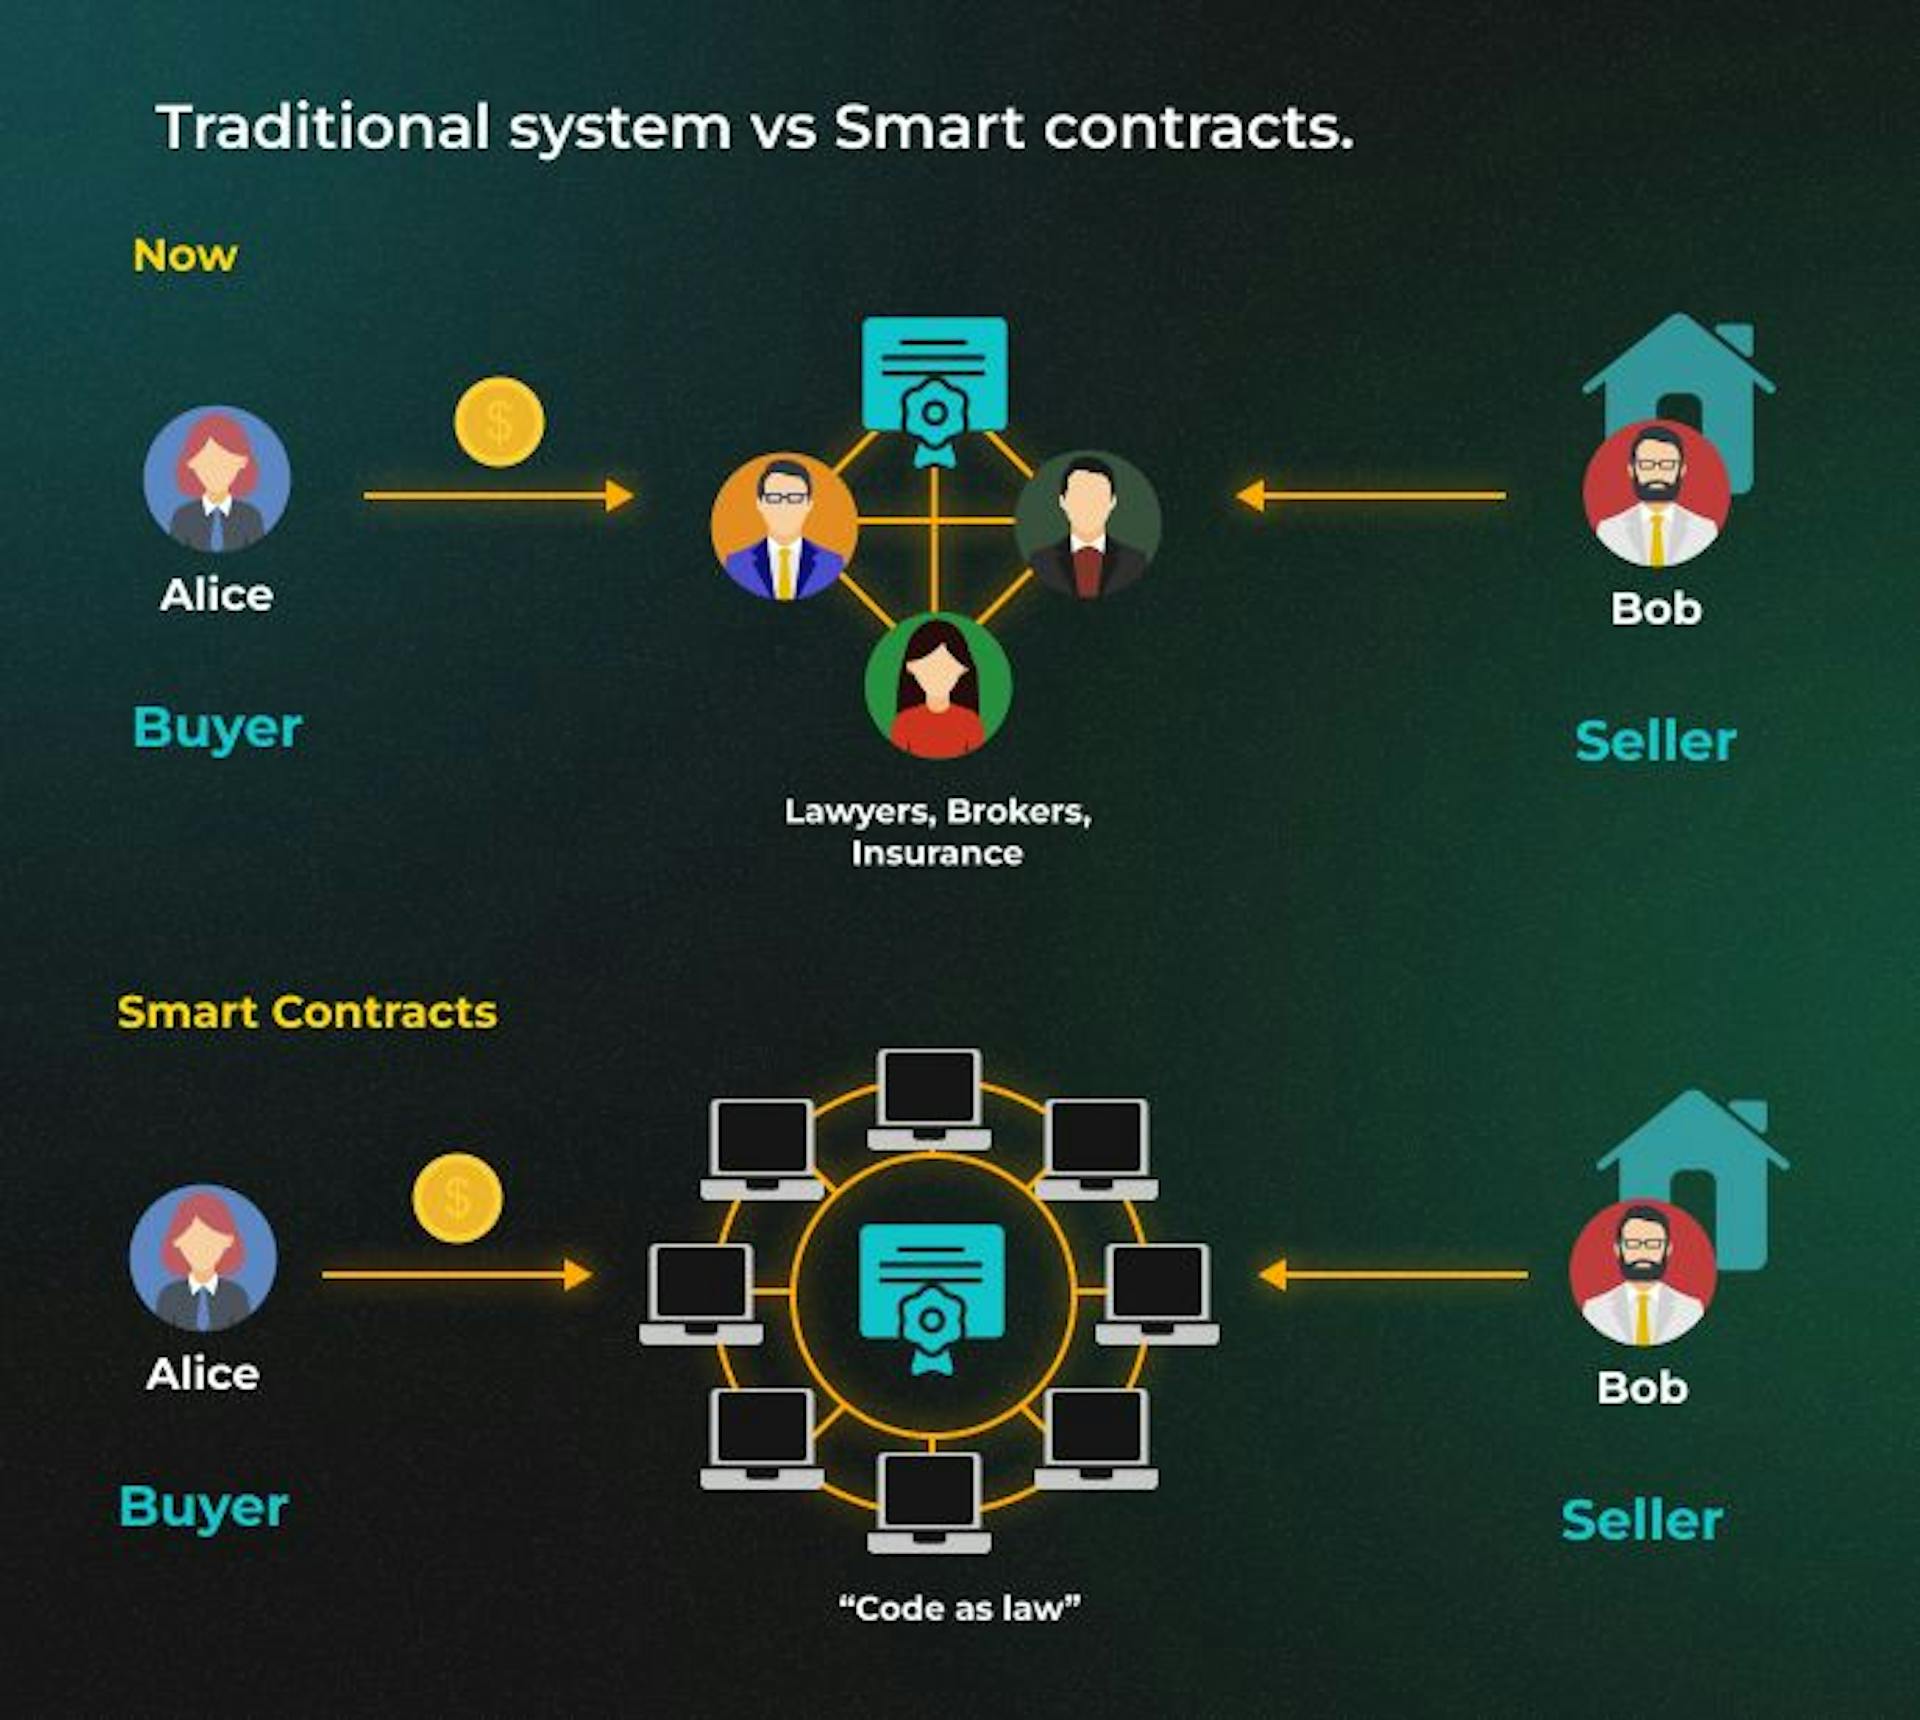 Brief explanation of how smart contracts work compared to the traditional system